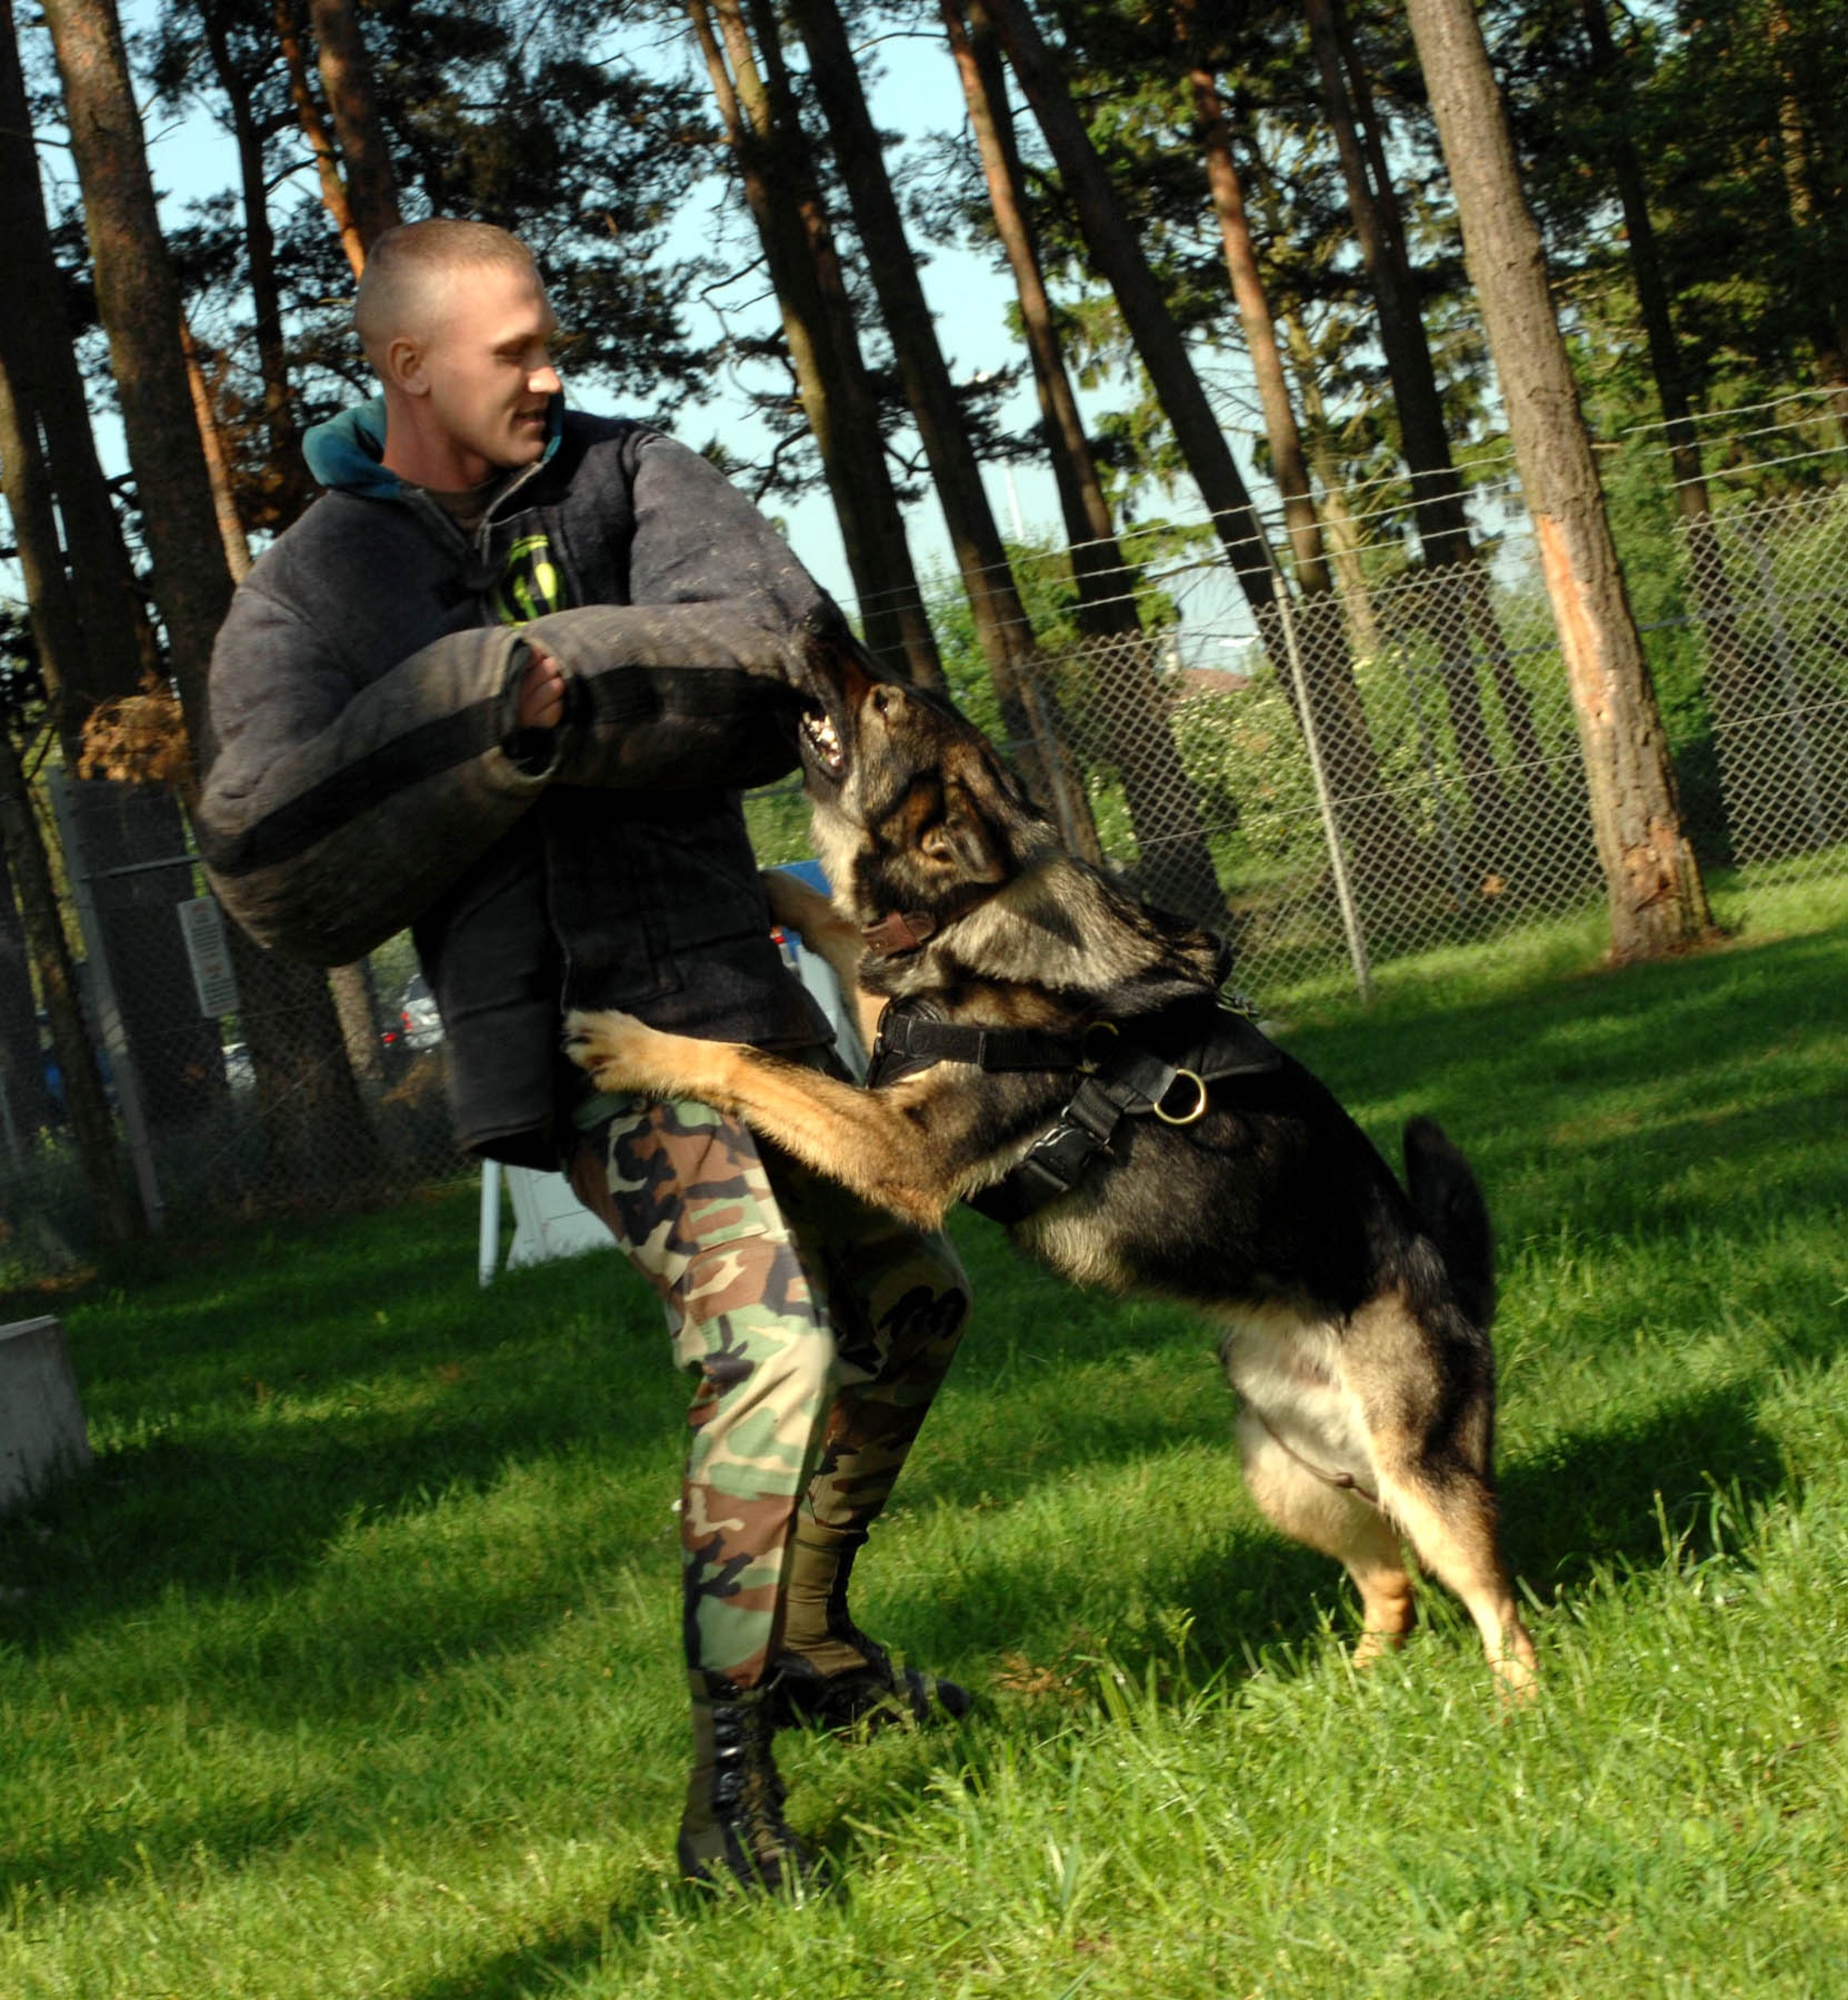 SPANGDAHLEM AIR BASE, GERMANY -- Staff Sgt. Mitchell Stein, Security Forces military working dog handler, aggressively trains Agar, a German Sheppard MWD, Spangdahlem Air Base, Germany, May 22, 2007. Agar is an experienced MWD who has deployed three times. (U.S. Air Force photo by Airman First Class Stephanie Clark) 